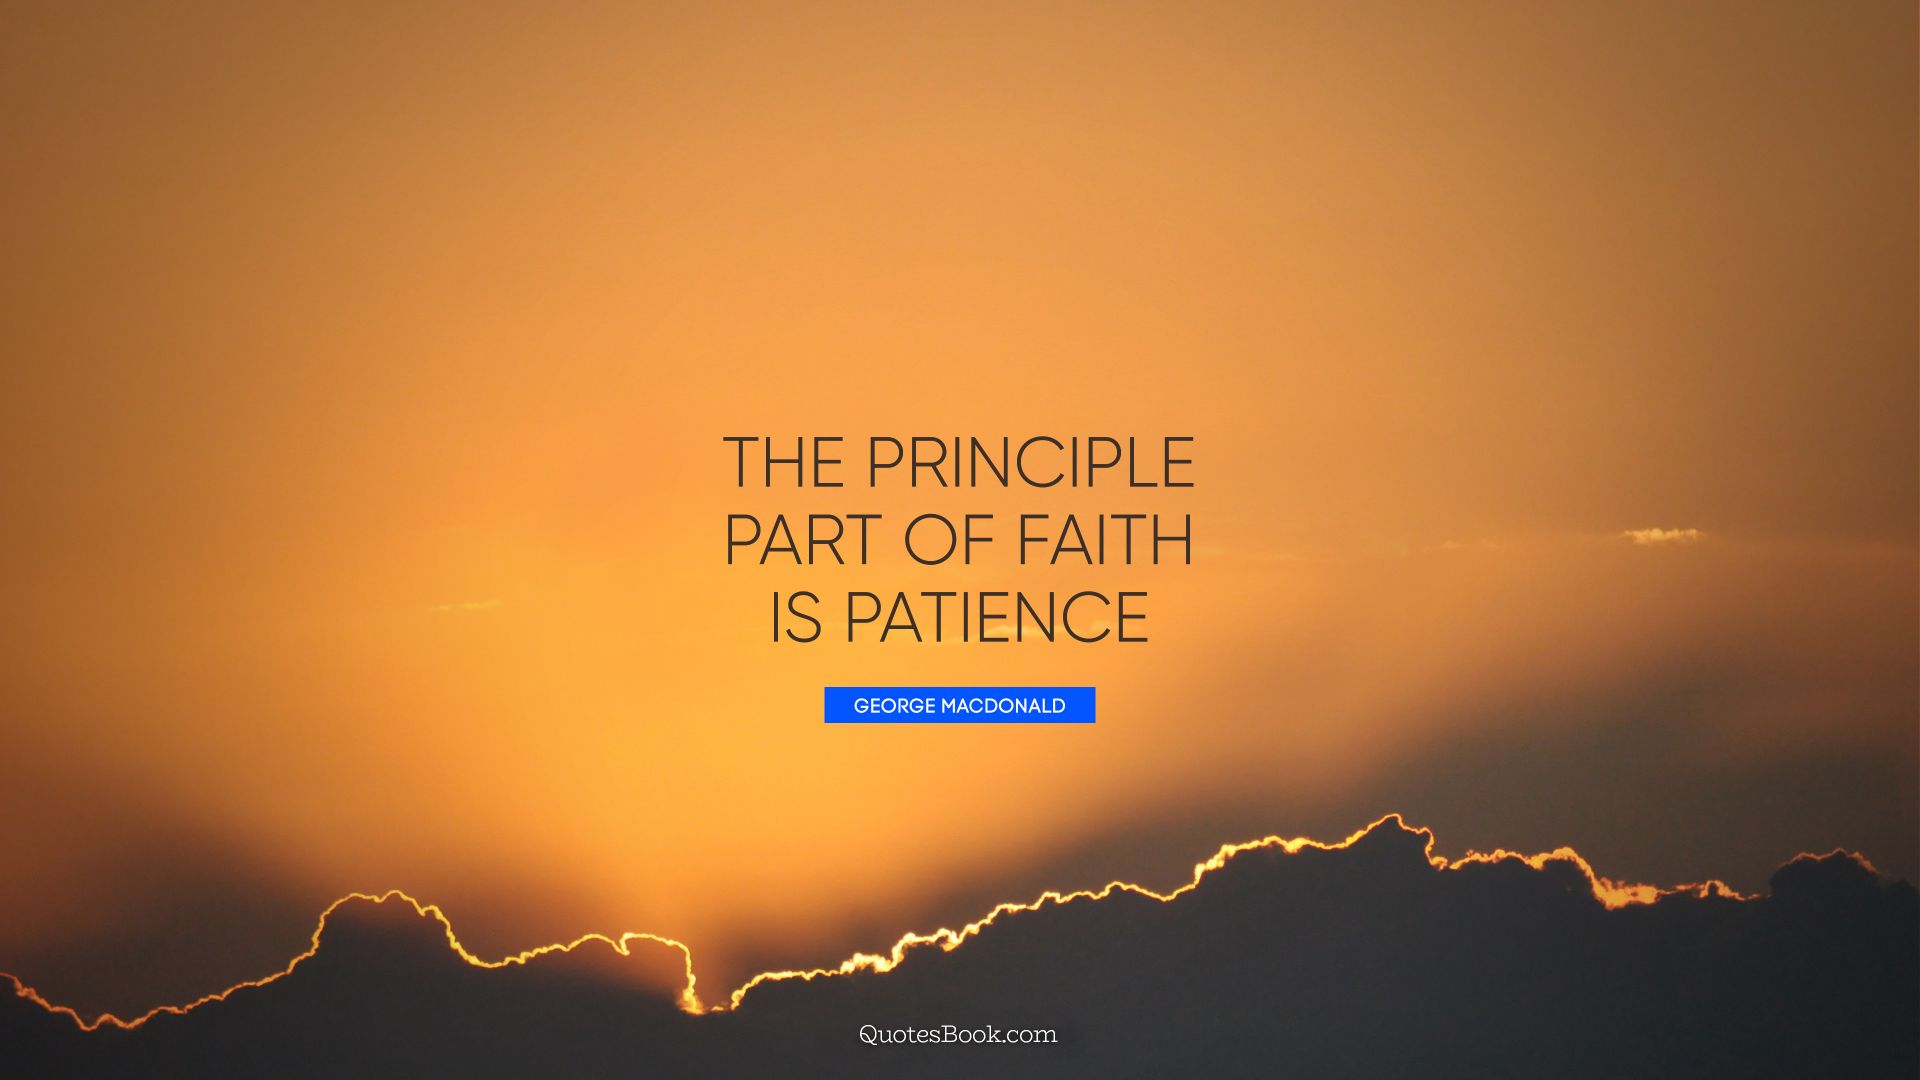 The principle part of faith is patience. - Quote by George MacDonald